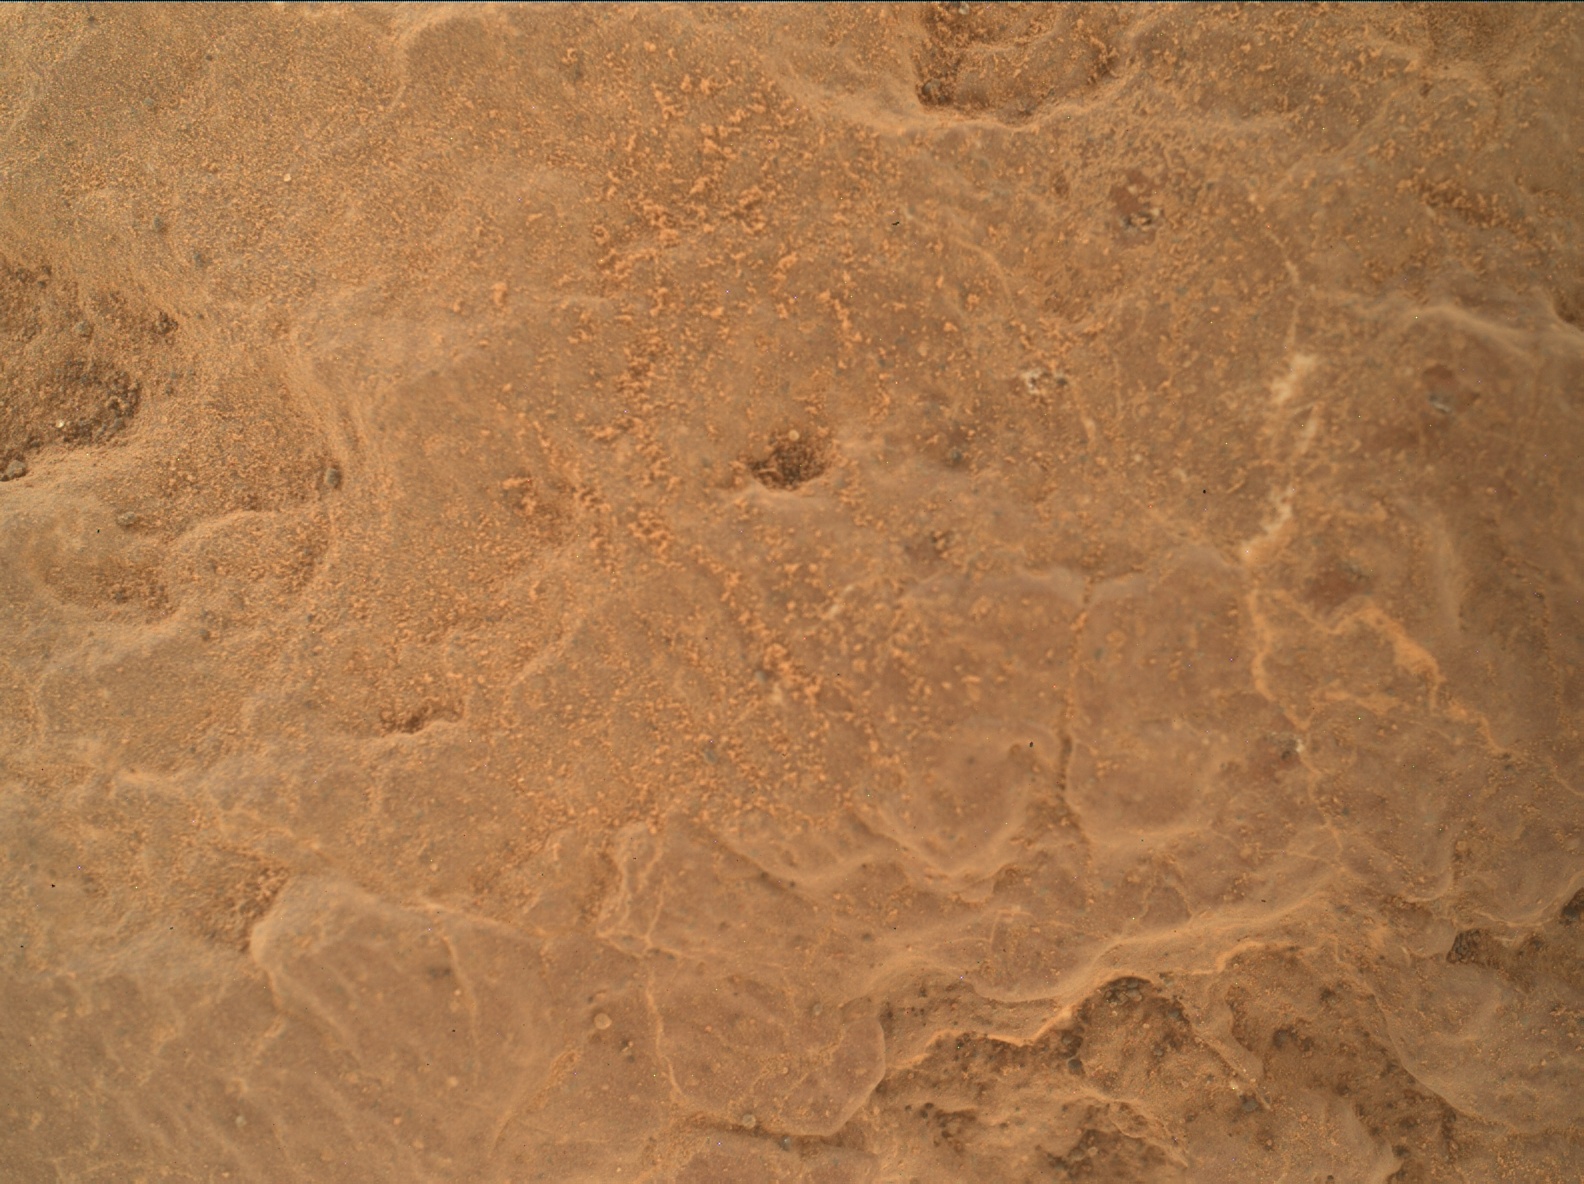 Nasa's Mars rover Curiosity acquired this image using its Mars Hand Lens Imager (MAHLI) on Sol 2333